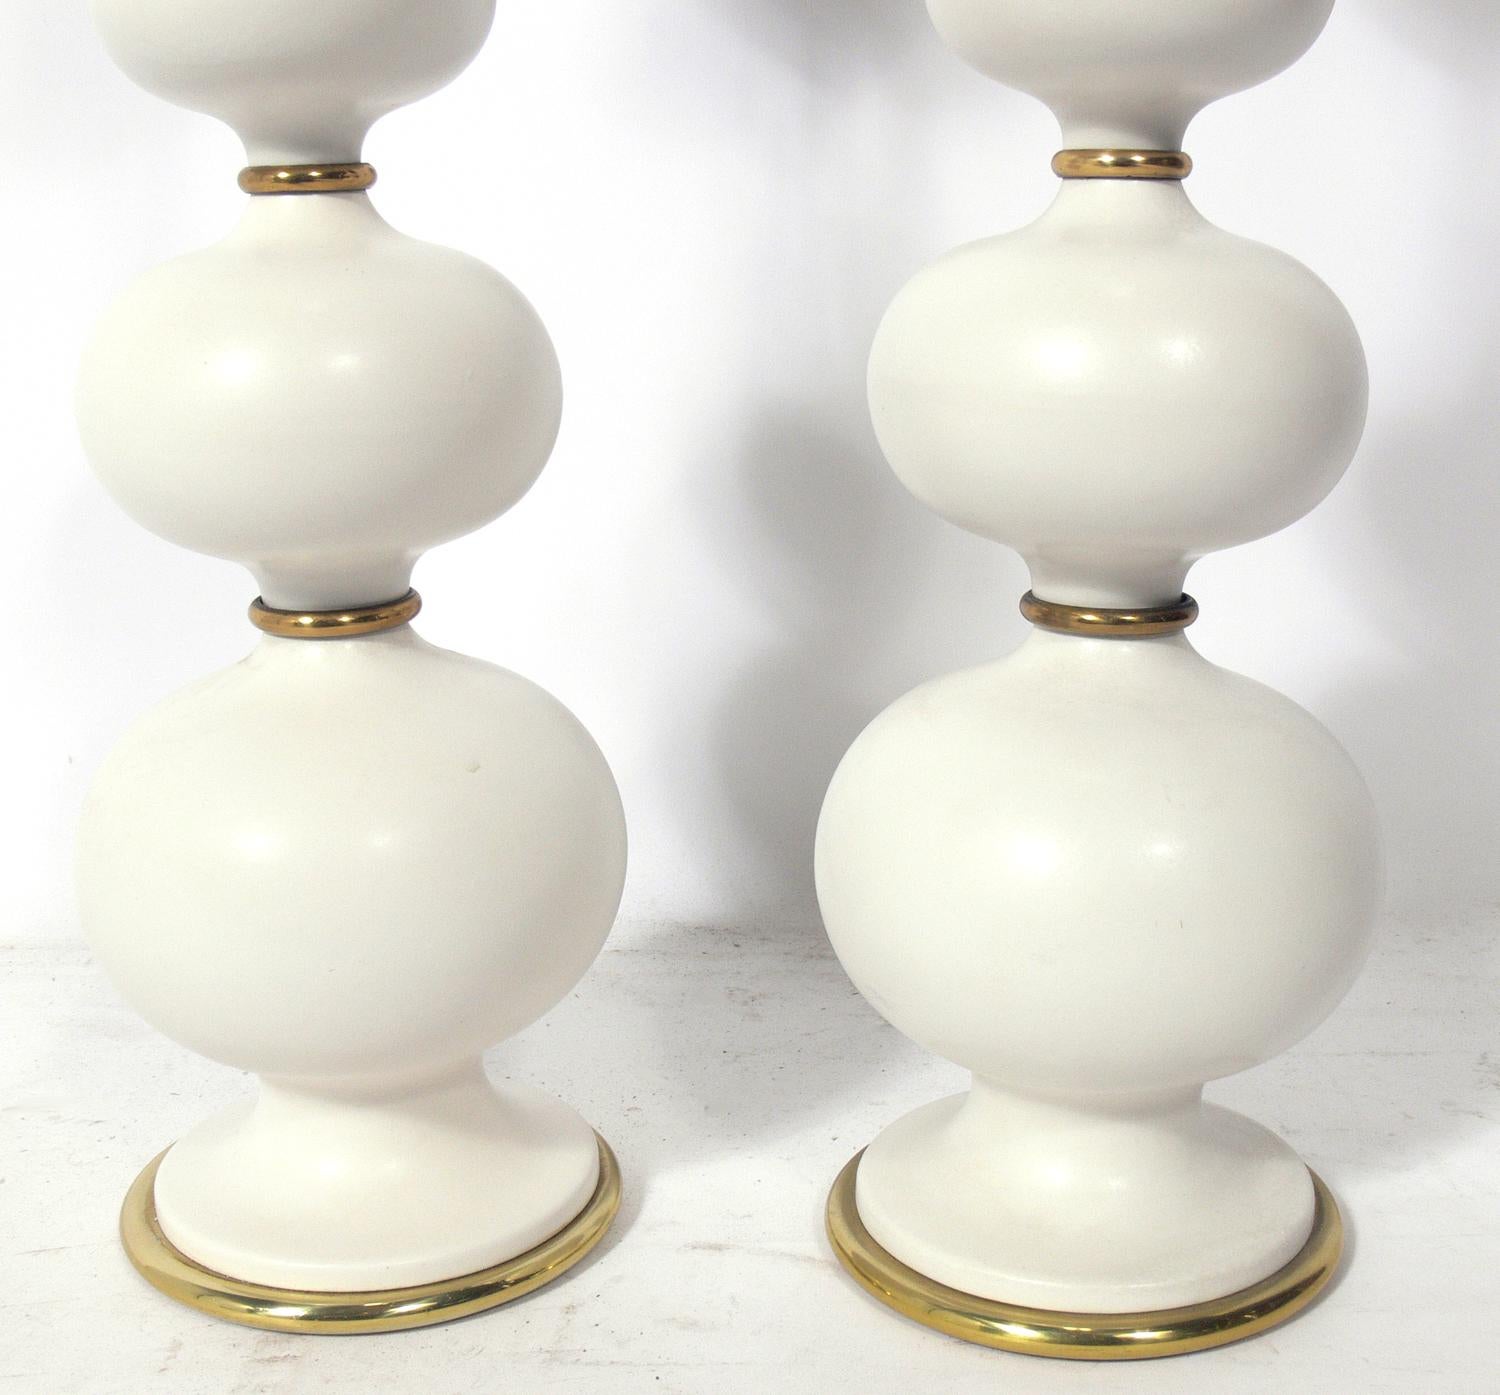 Sculptural ceramic lamps, designed by Gerald Thurston for Lightolier, circa 1950s. They have been rewired and are ready to use. The price noted below is for the pair of lamps, including the shades.